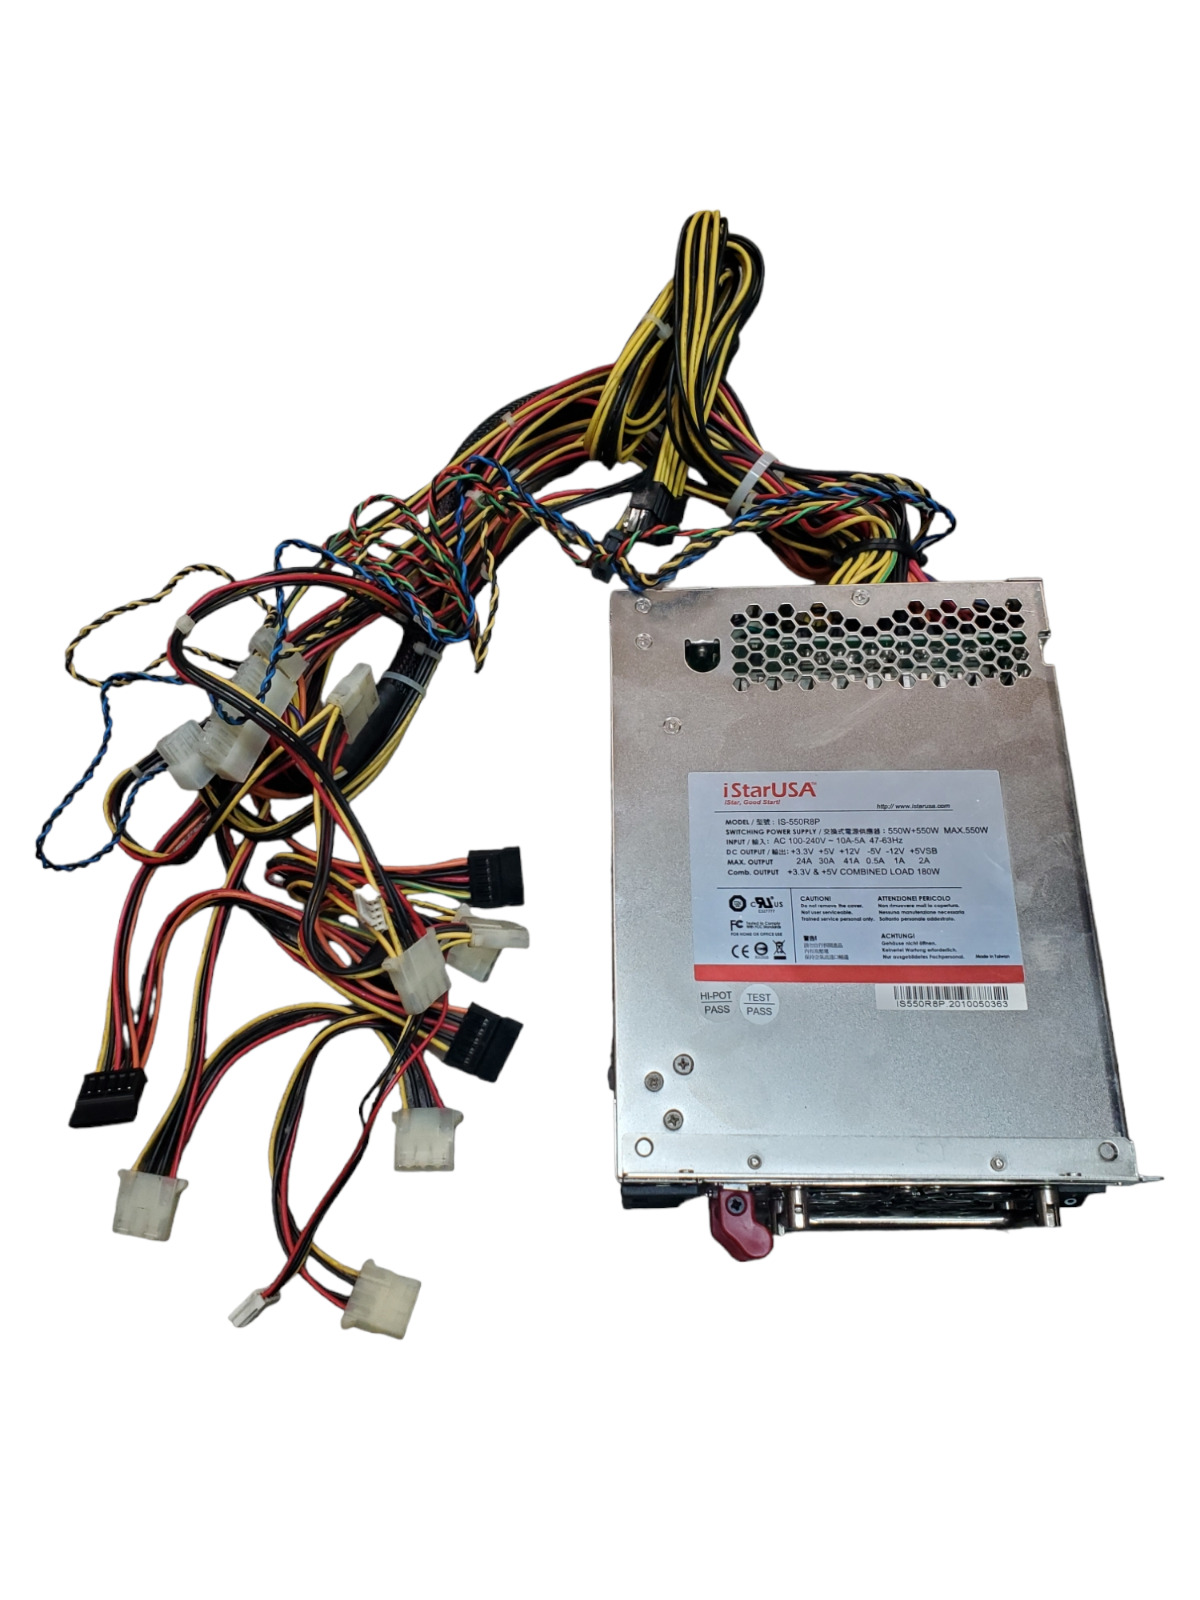 iStarUSA 550W PSU Redundant Power Supply IS-550R8P for ExacqVision 16-CCR-3000-E